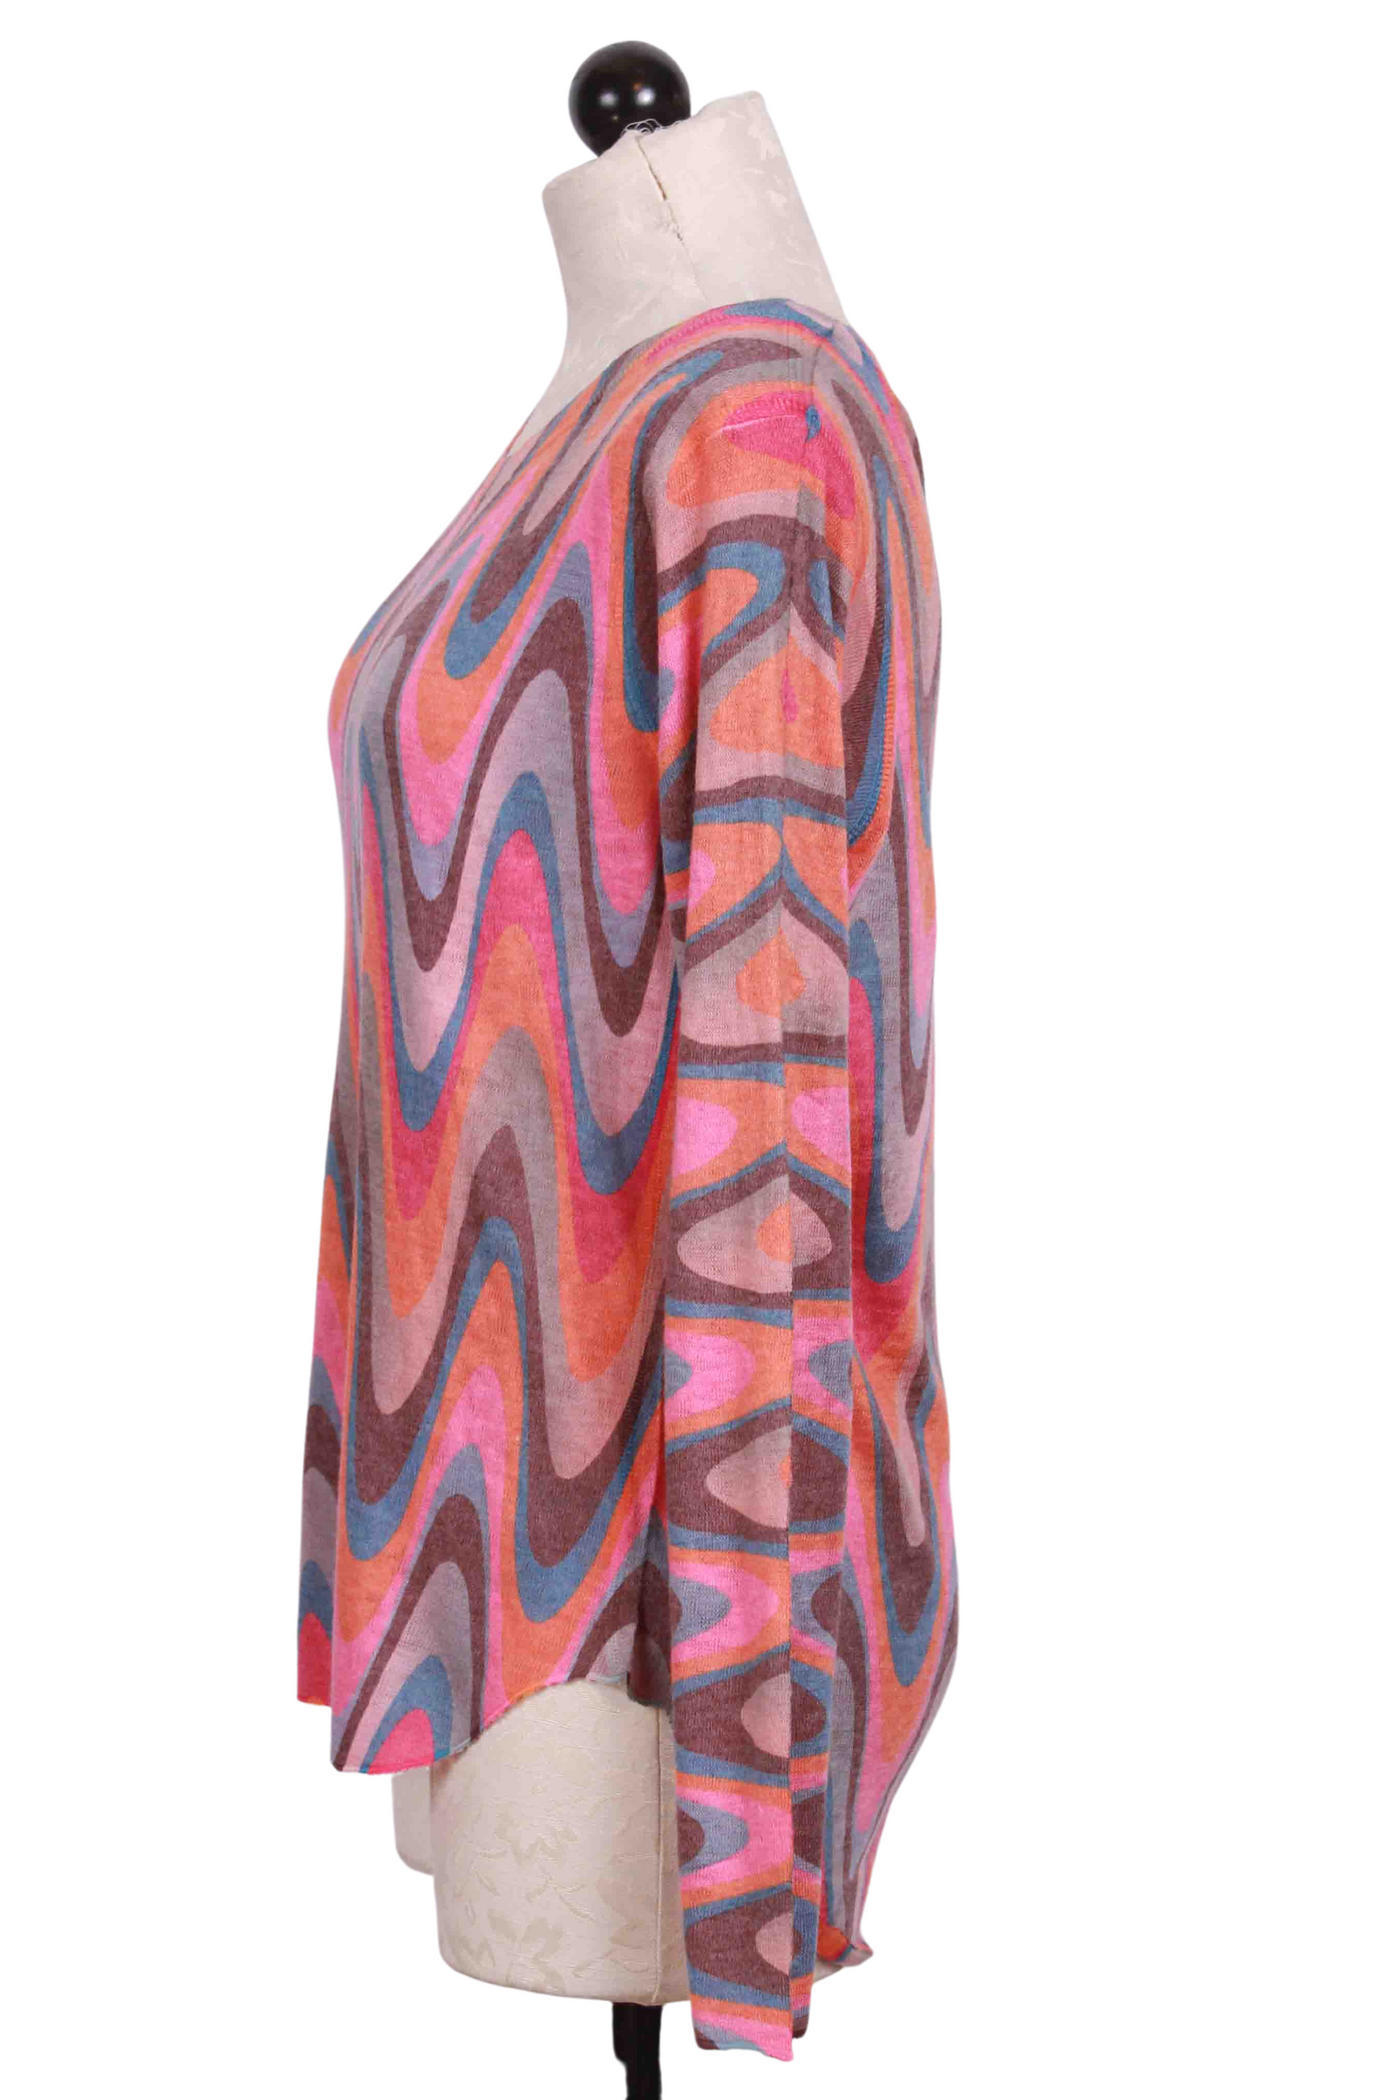 side view of Multicolored Long Sleeve Wavy Print Top by Nally and Millie